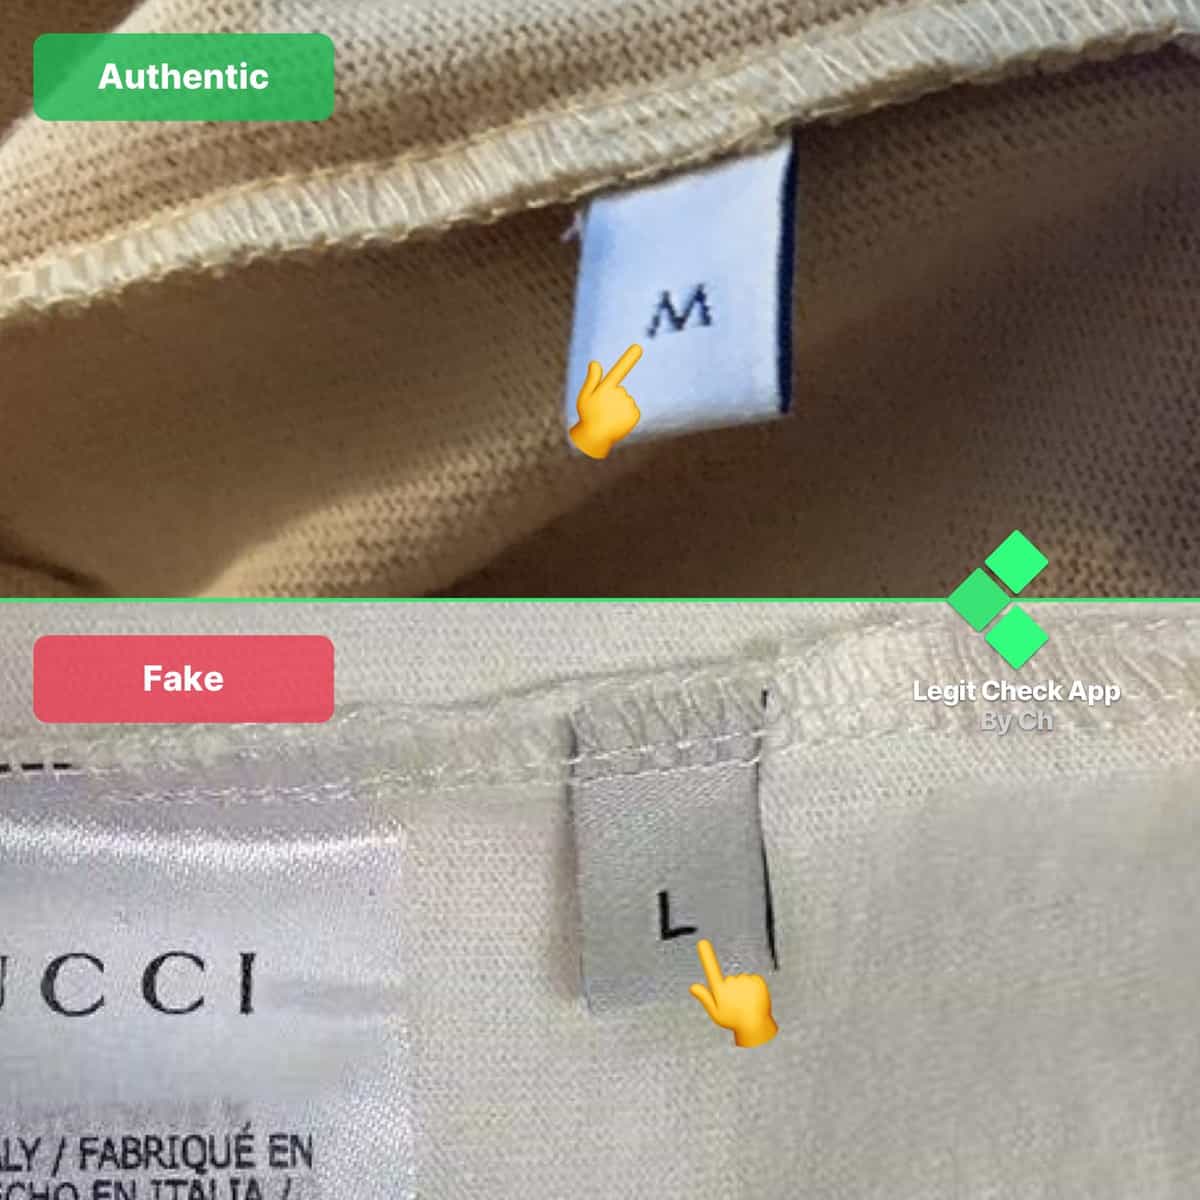 Gucci Authenticated Jacket